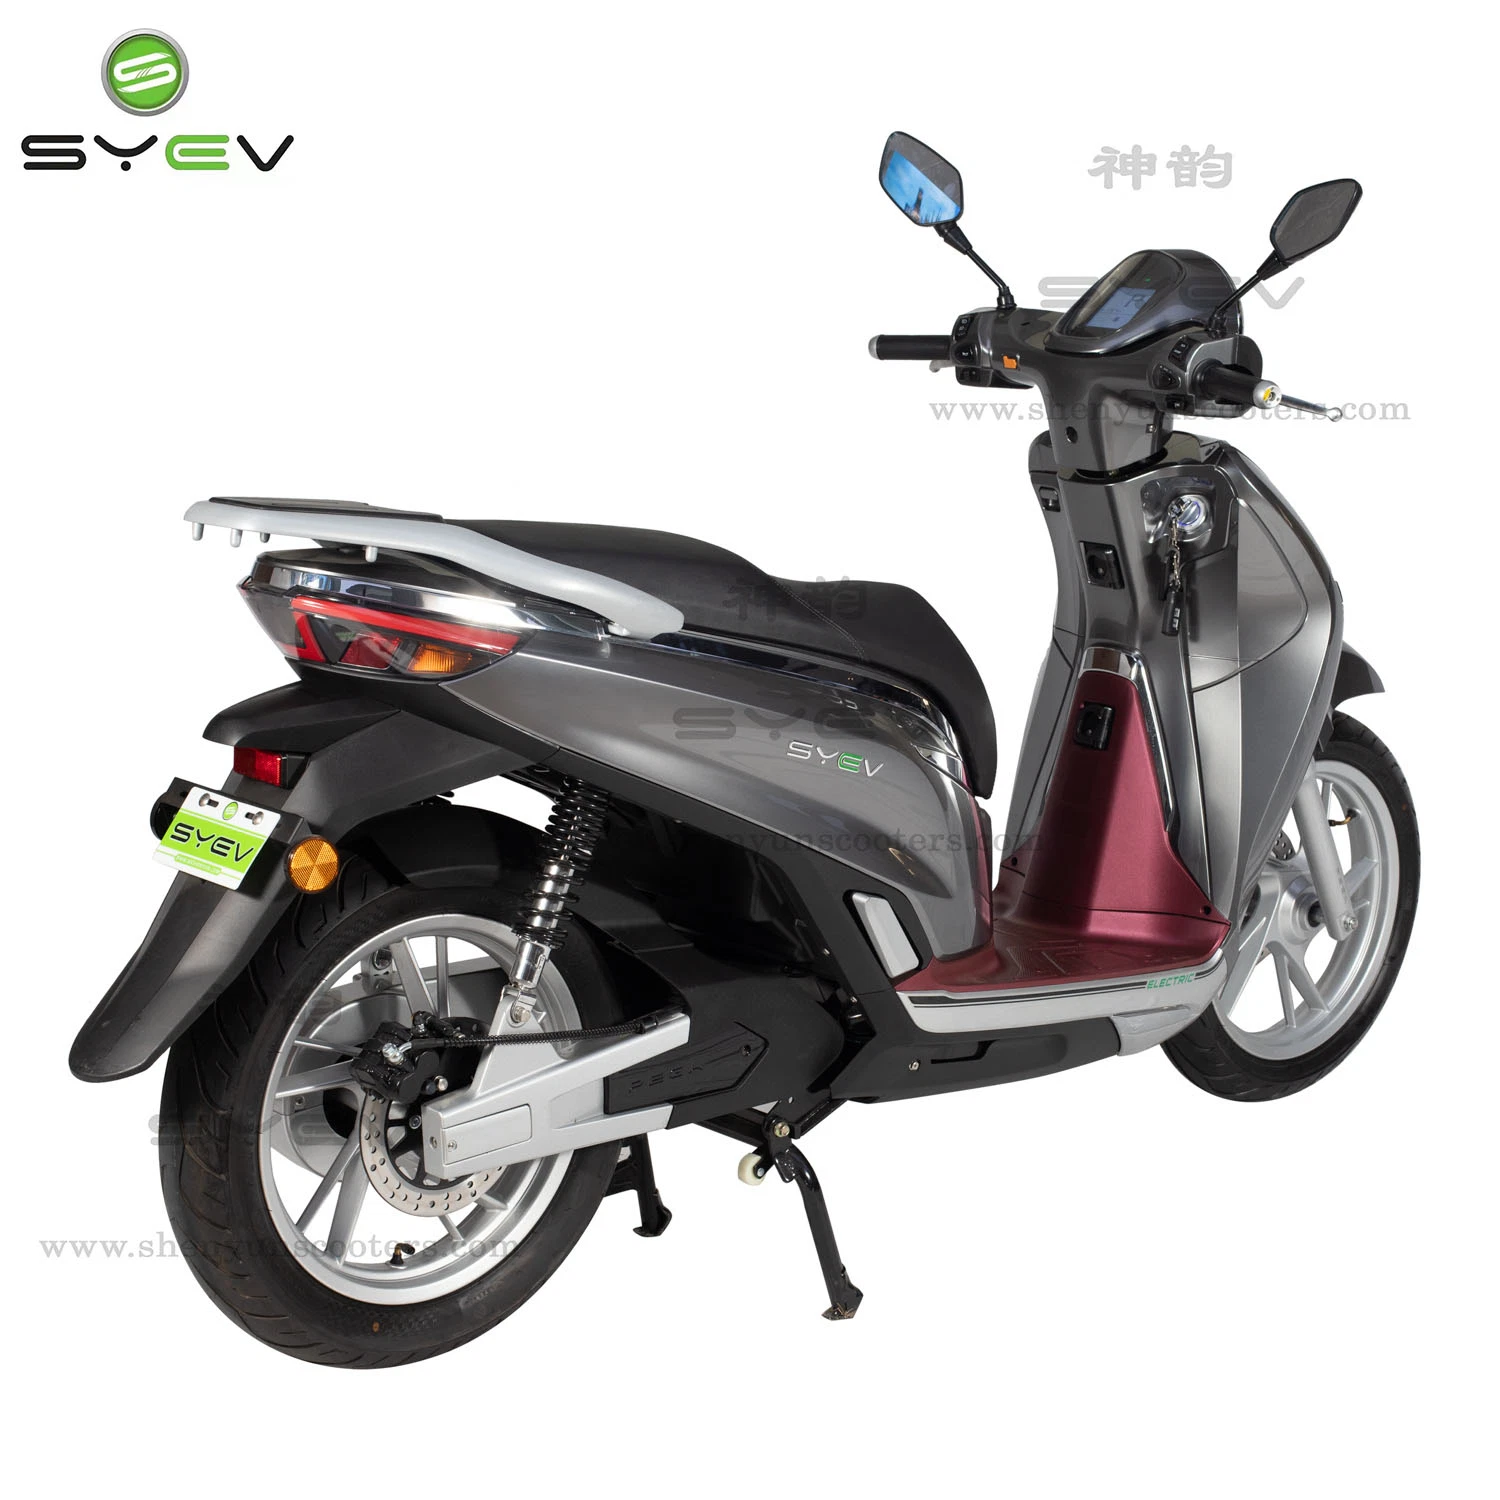 EEC Sy-T500 72V 3000W Lithium Battery 2 Two Wheel 80km/H High Speed off Road Racing Powerful Electric Motorcycle with Long Range Motor Mobility Scooter L3e